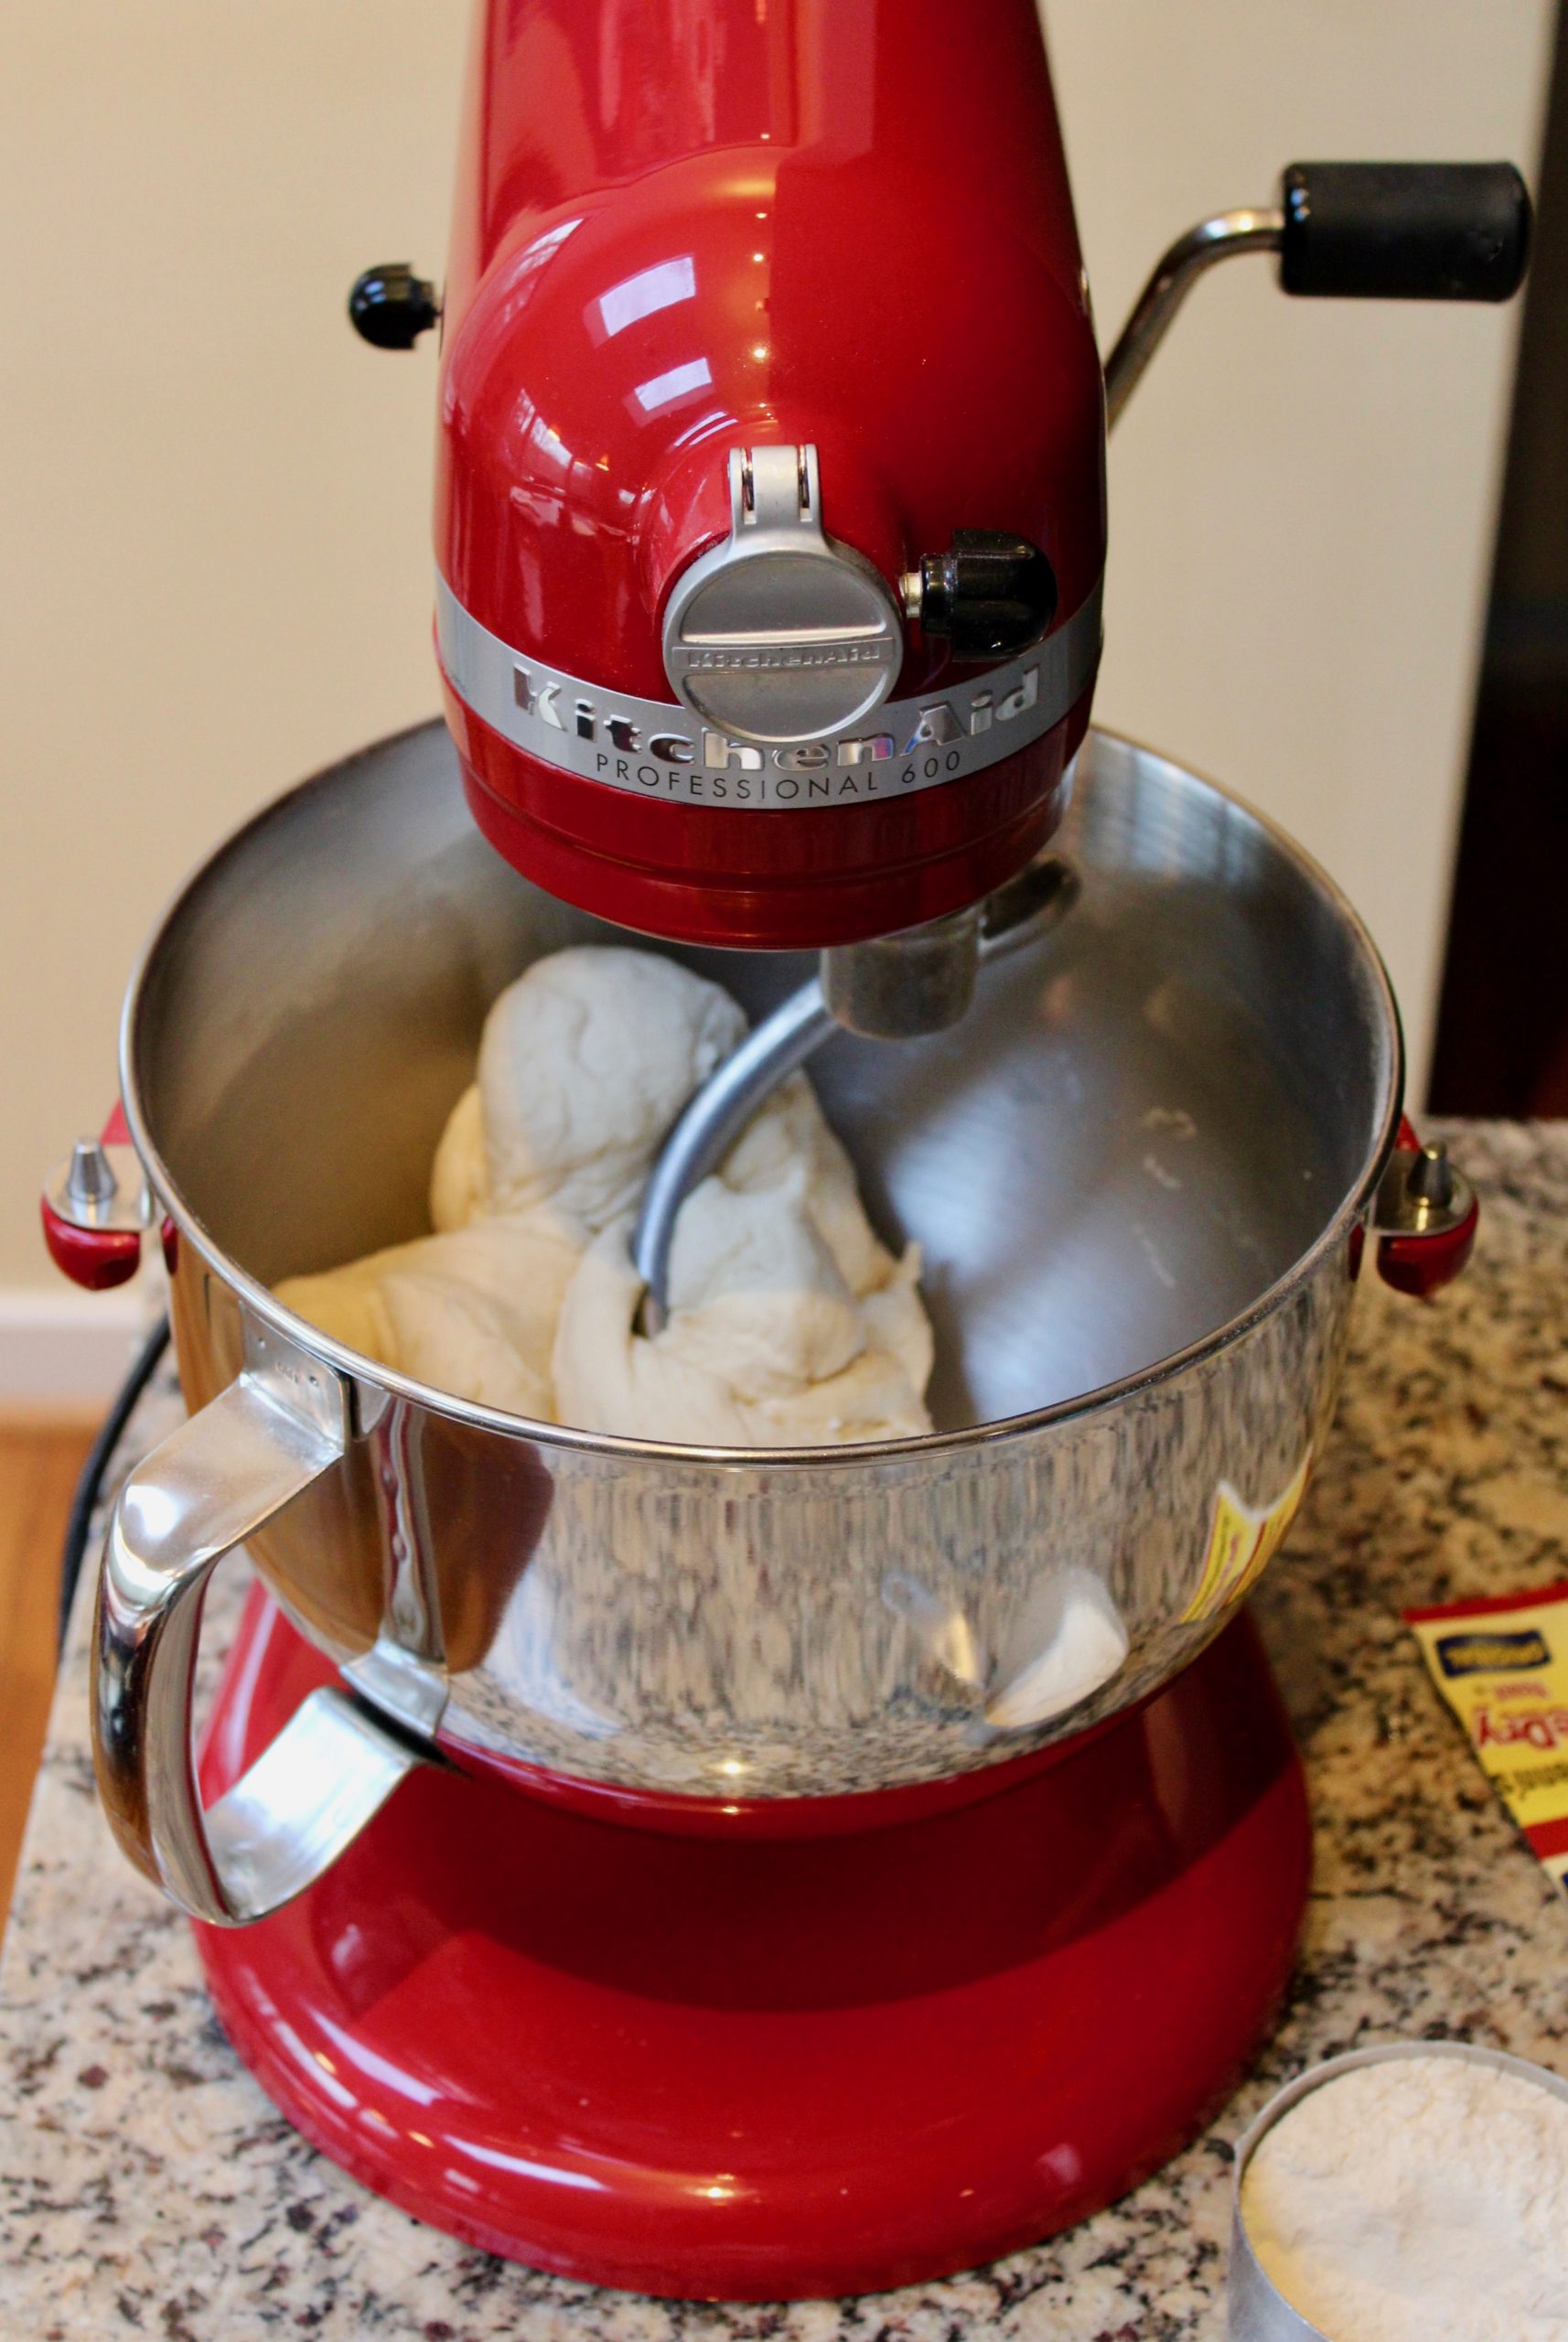 https://www.epicuricloud.com/wp-content/uploads/2020/03/Stand-Mixer-Pizza-Dough-in-Mixer-scaled.jpg